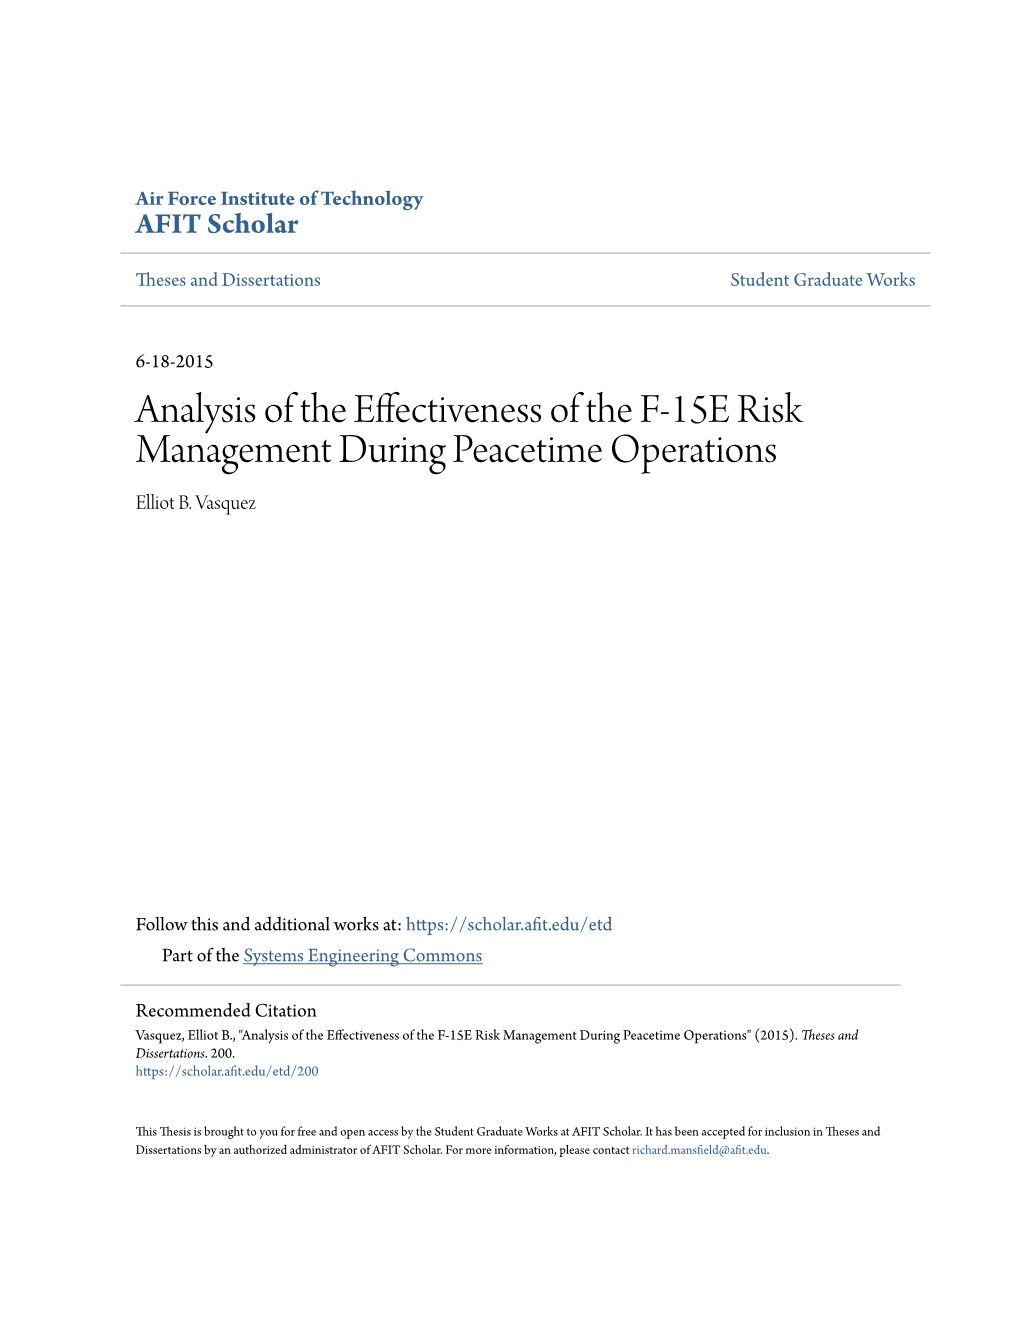 Analysis of the Effectiveness of the F-15E Risk Management During Peacetime Operations Elliot B